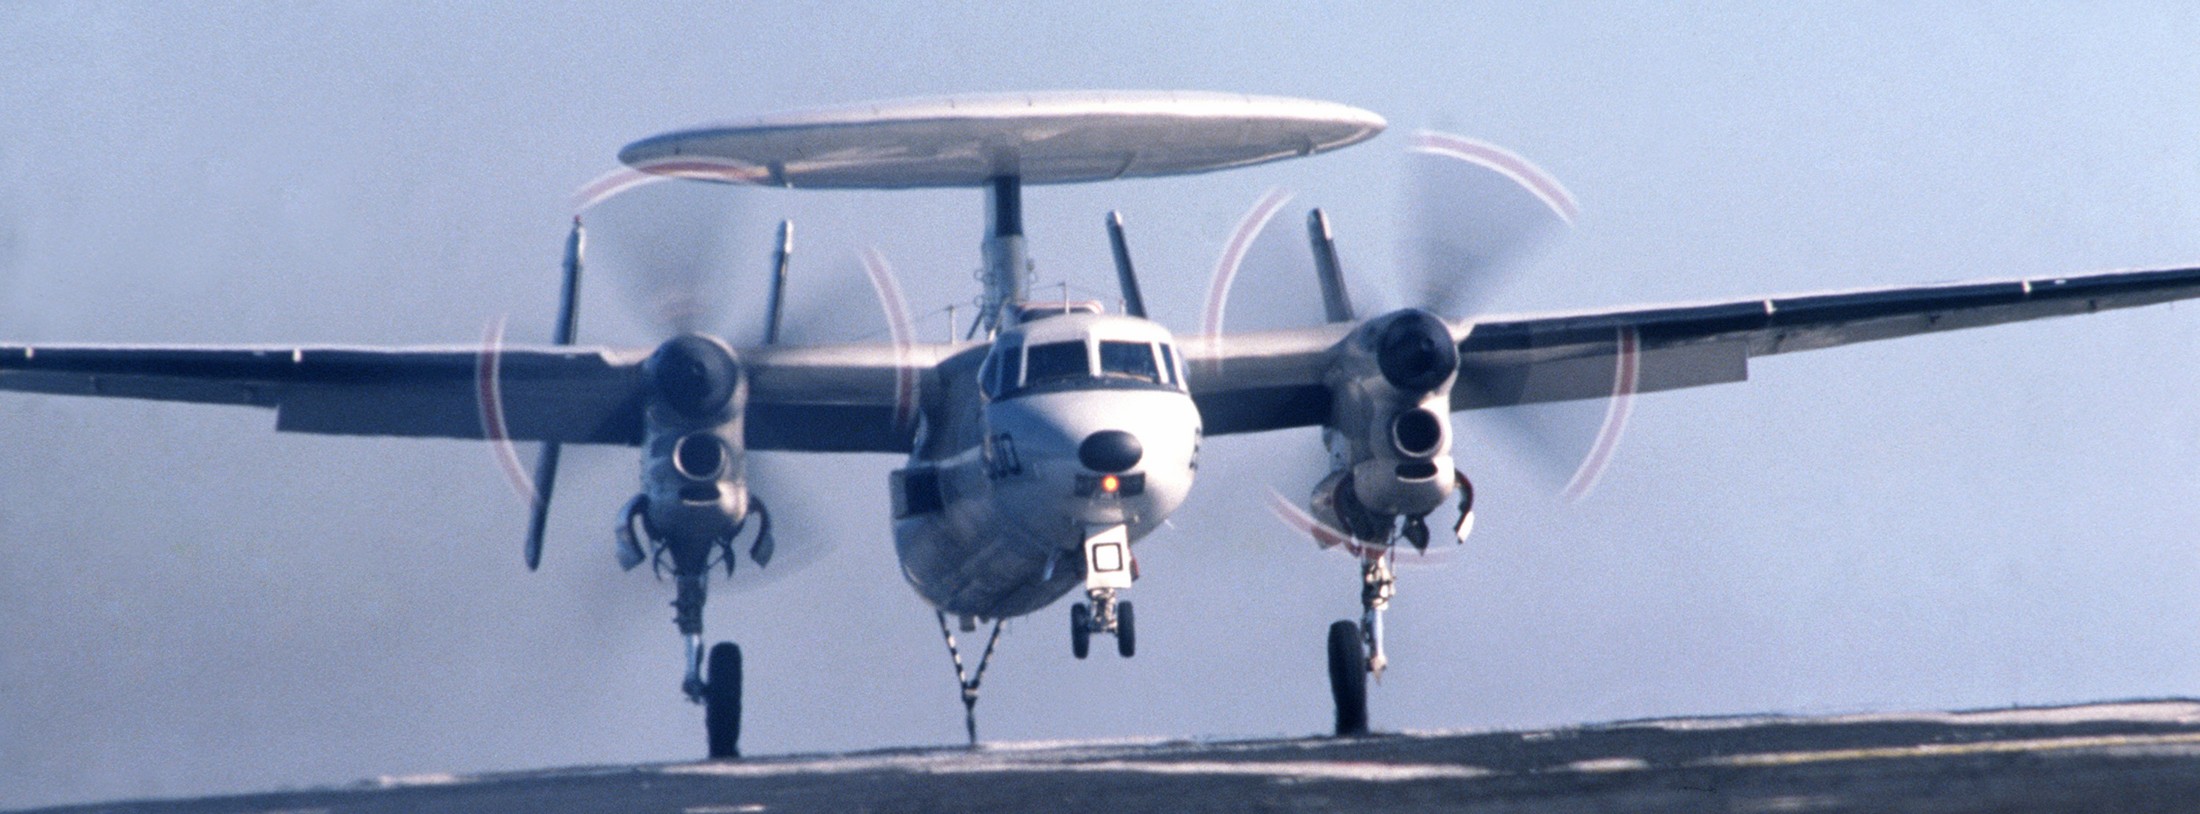 vaw-88 cottonpickers carrier airborne early warning squadron us navy reserve cvwr-30 grumman e-2c hawkeye 03